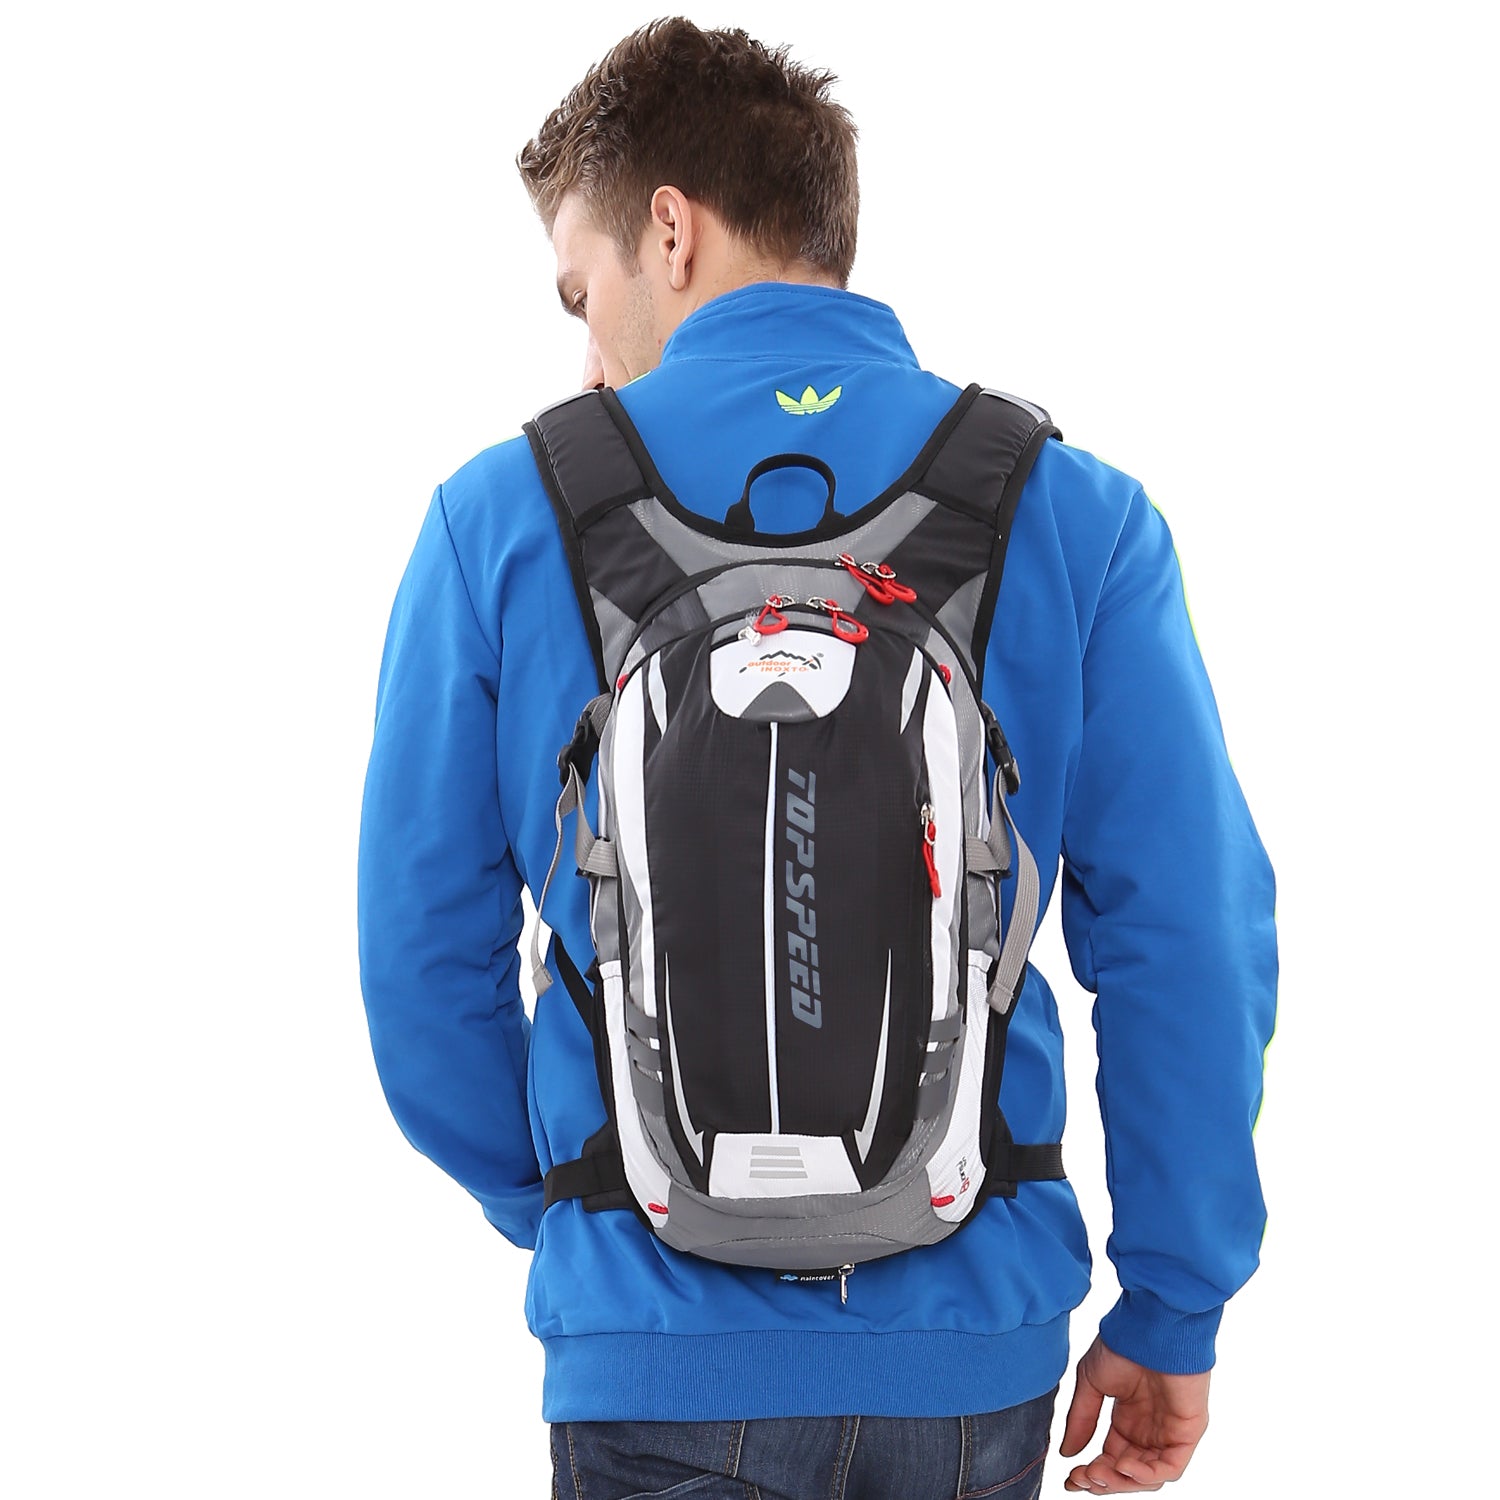 OUTDOOR Cycling Hydration for Camping Outdoor Marathon | 12 INOXTO INOXTO Race Trail Backpack